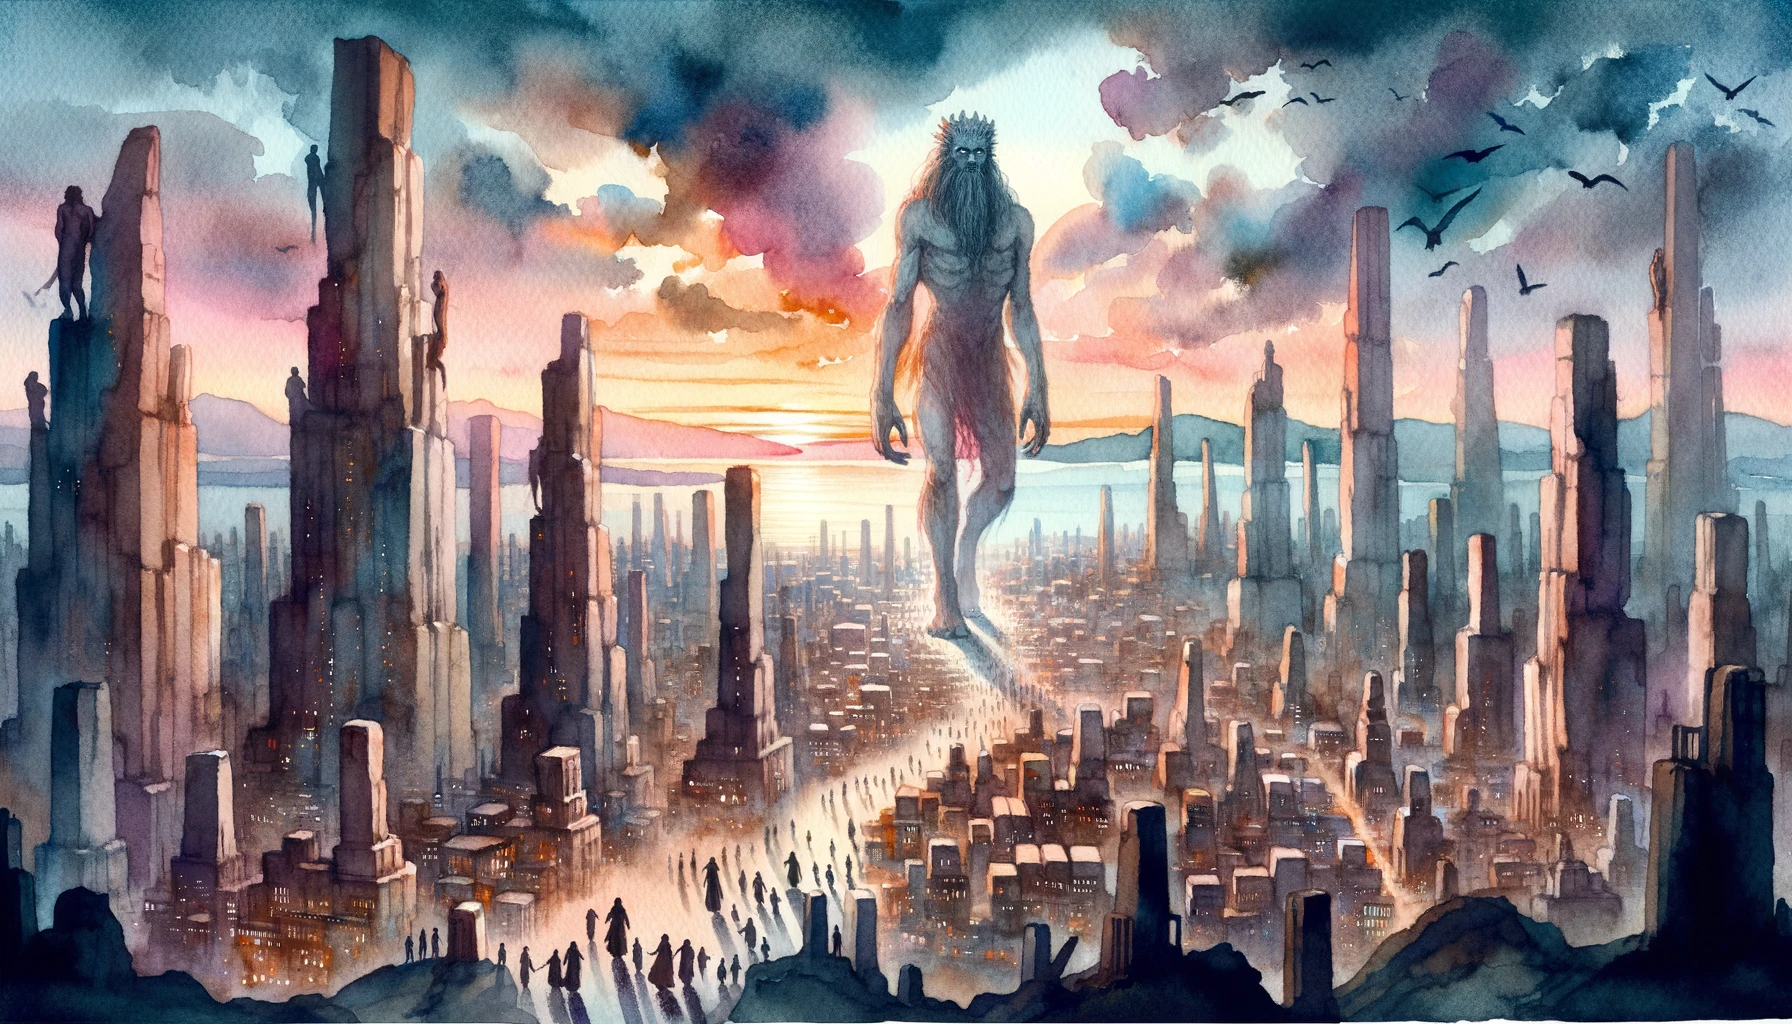 Vast ancient cityscape at twilight. Towering figures, representing the Nephilim, walk among the city structures, their presence evoking awe and wonder among the inhabitants.